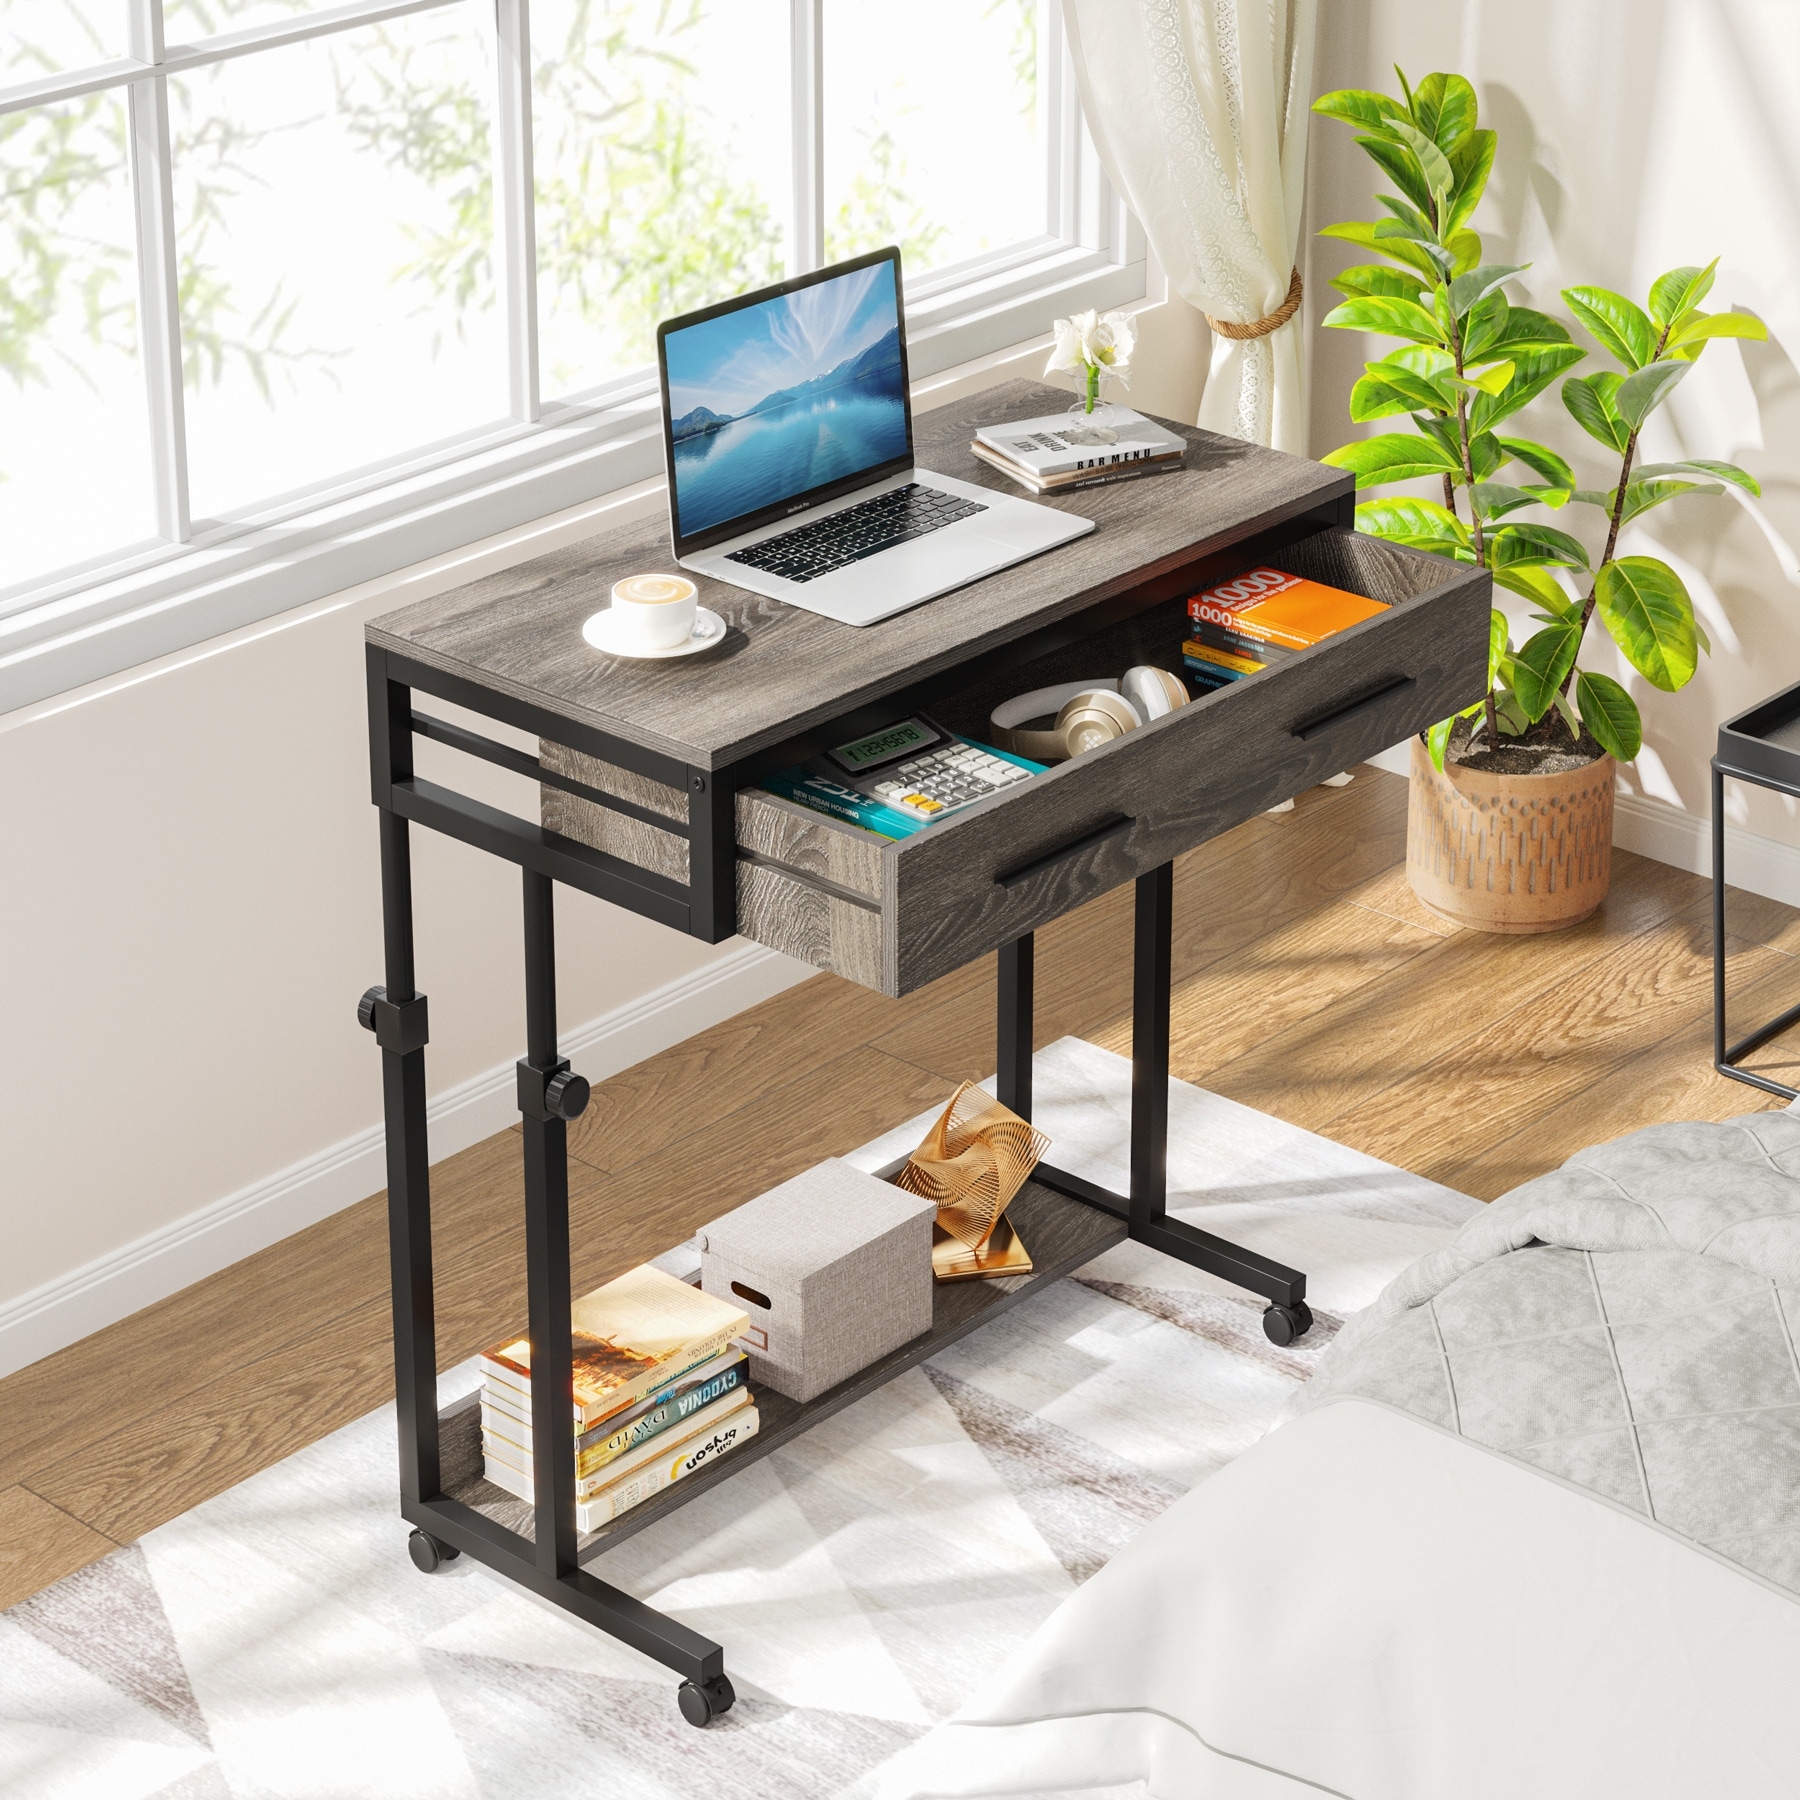 https://ak1.ostkcdn.com/images/products/is/images/direct/f357ad3e285be683a0b7522d33d8cf36b209ecf0/Height-Adjustable-Standing-Laptop-C-Table%2CMobile-Portable-Desk-with-Drawers-for-Home-Office-Sofa-Bed.jpg